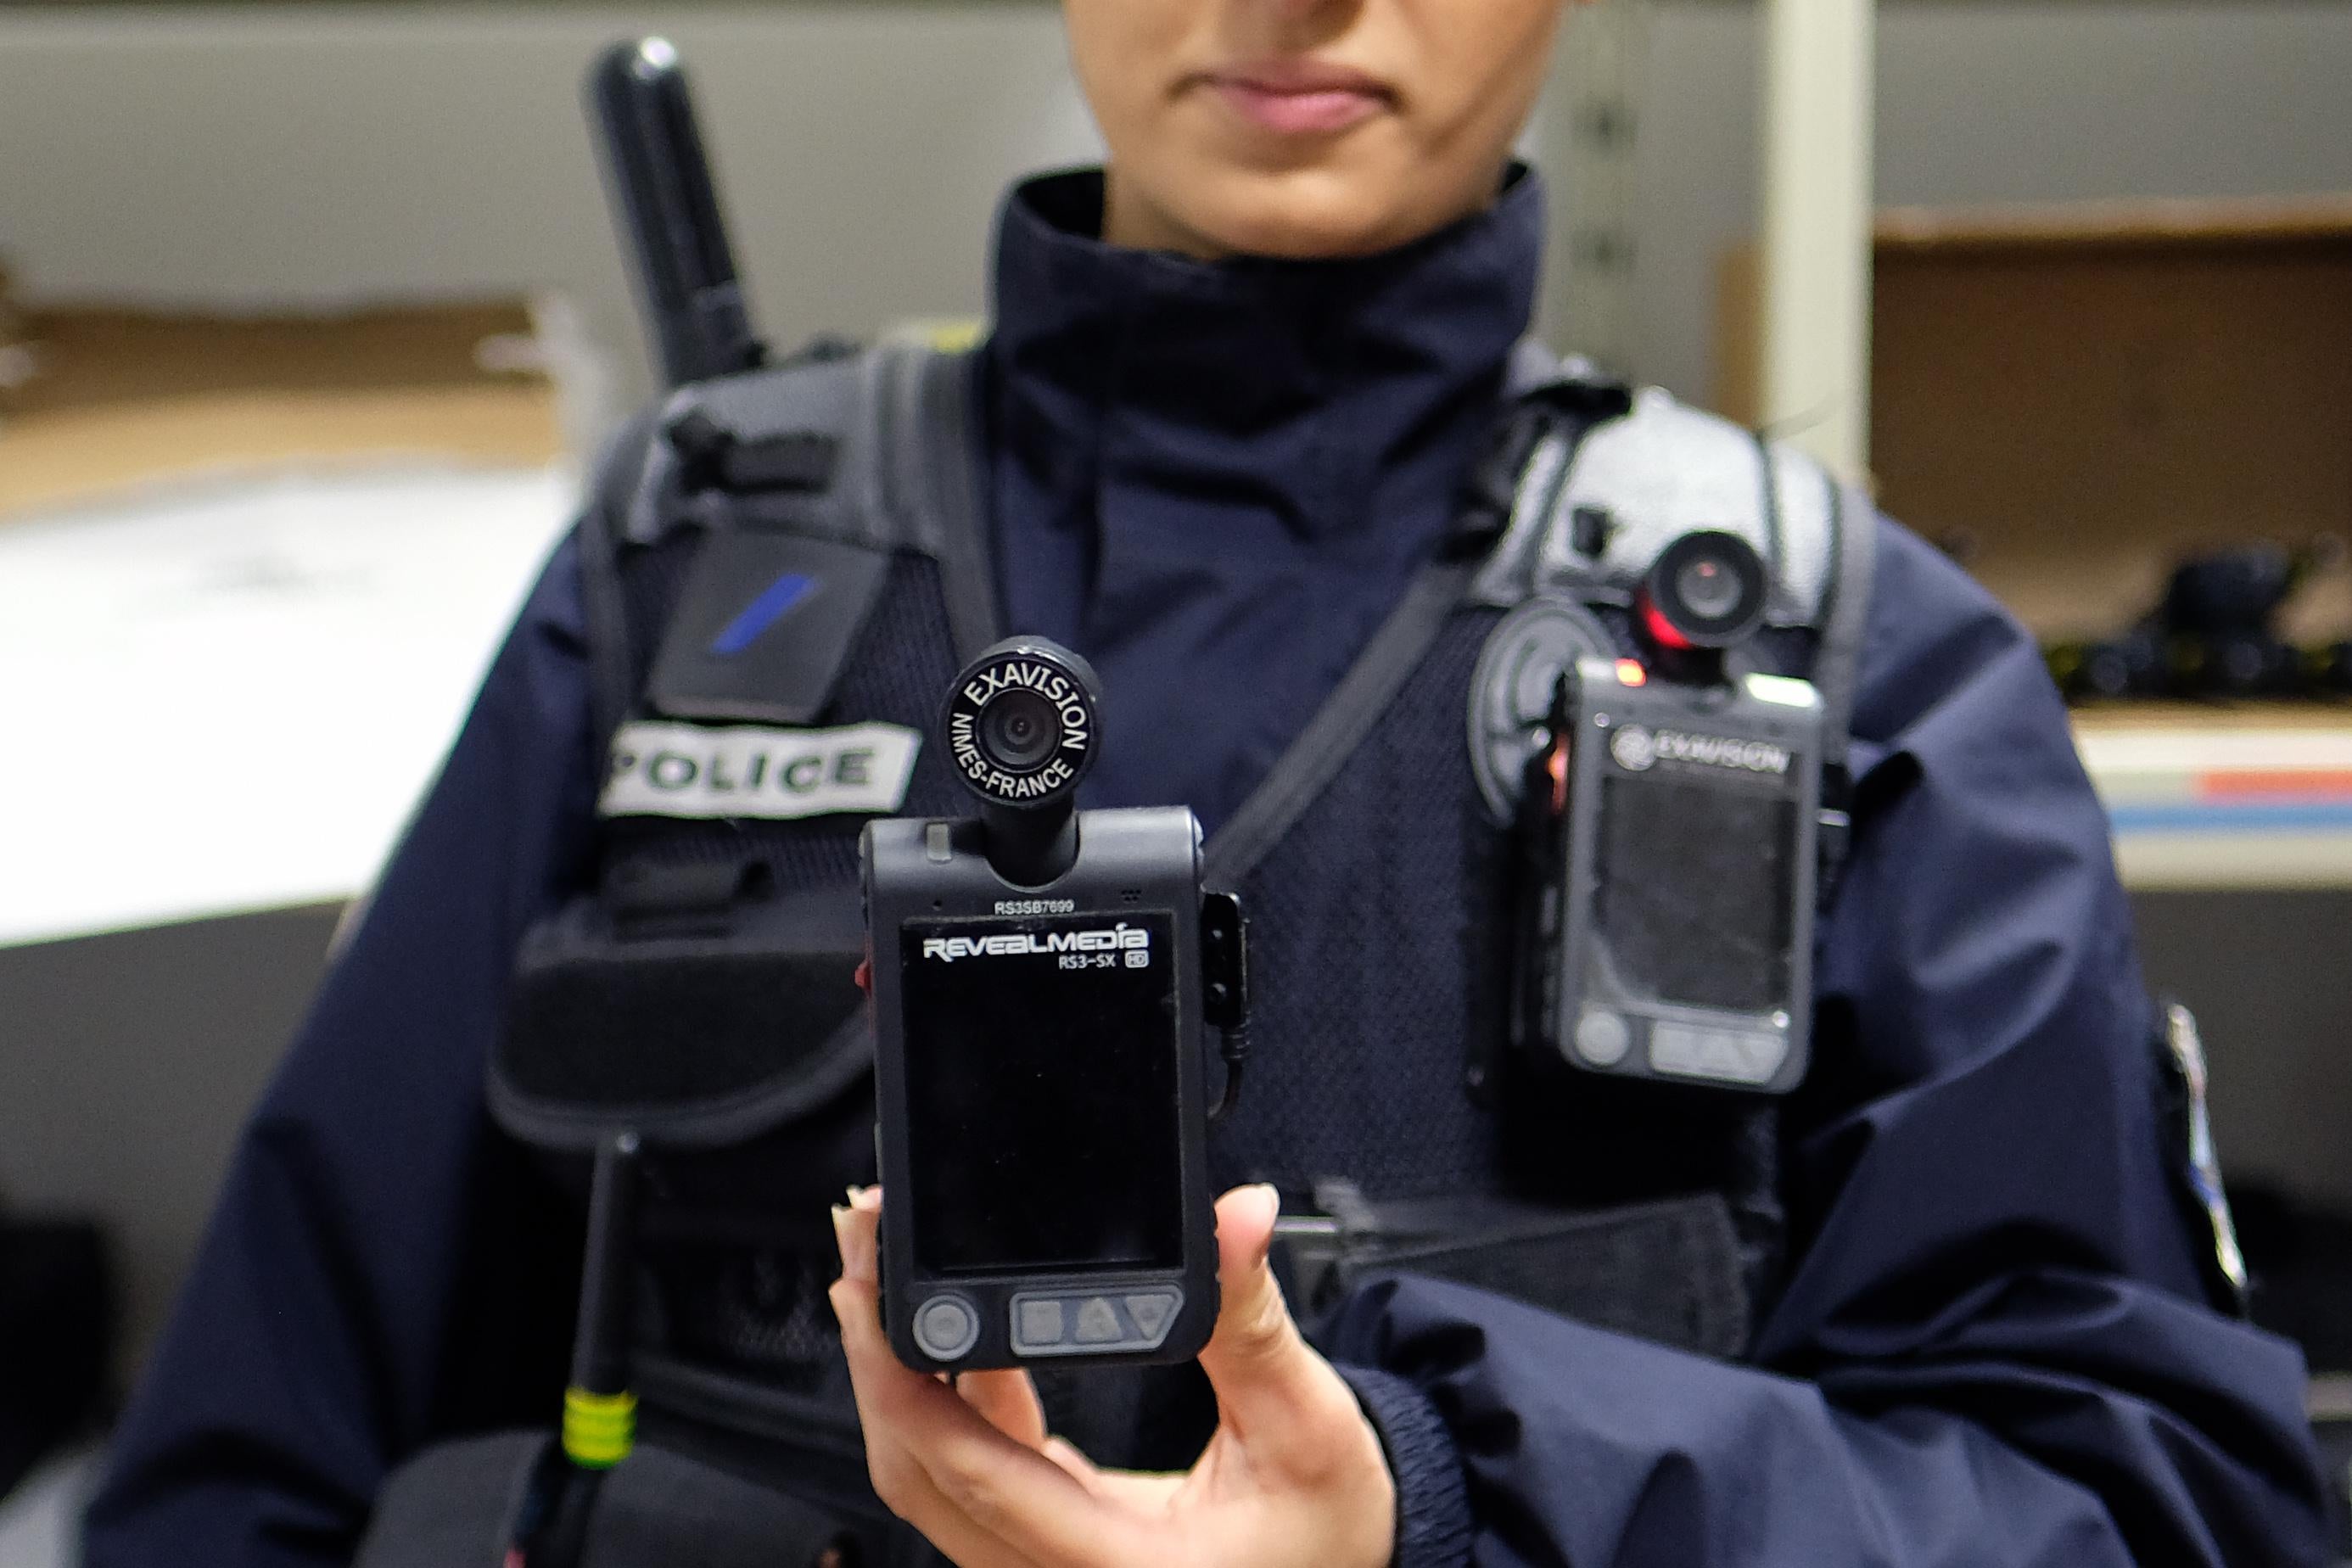 A person in police gear holds up a body camera.